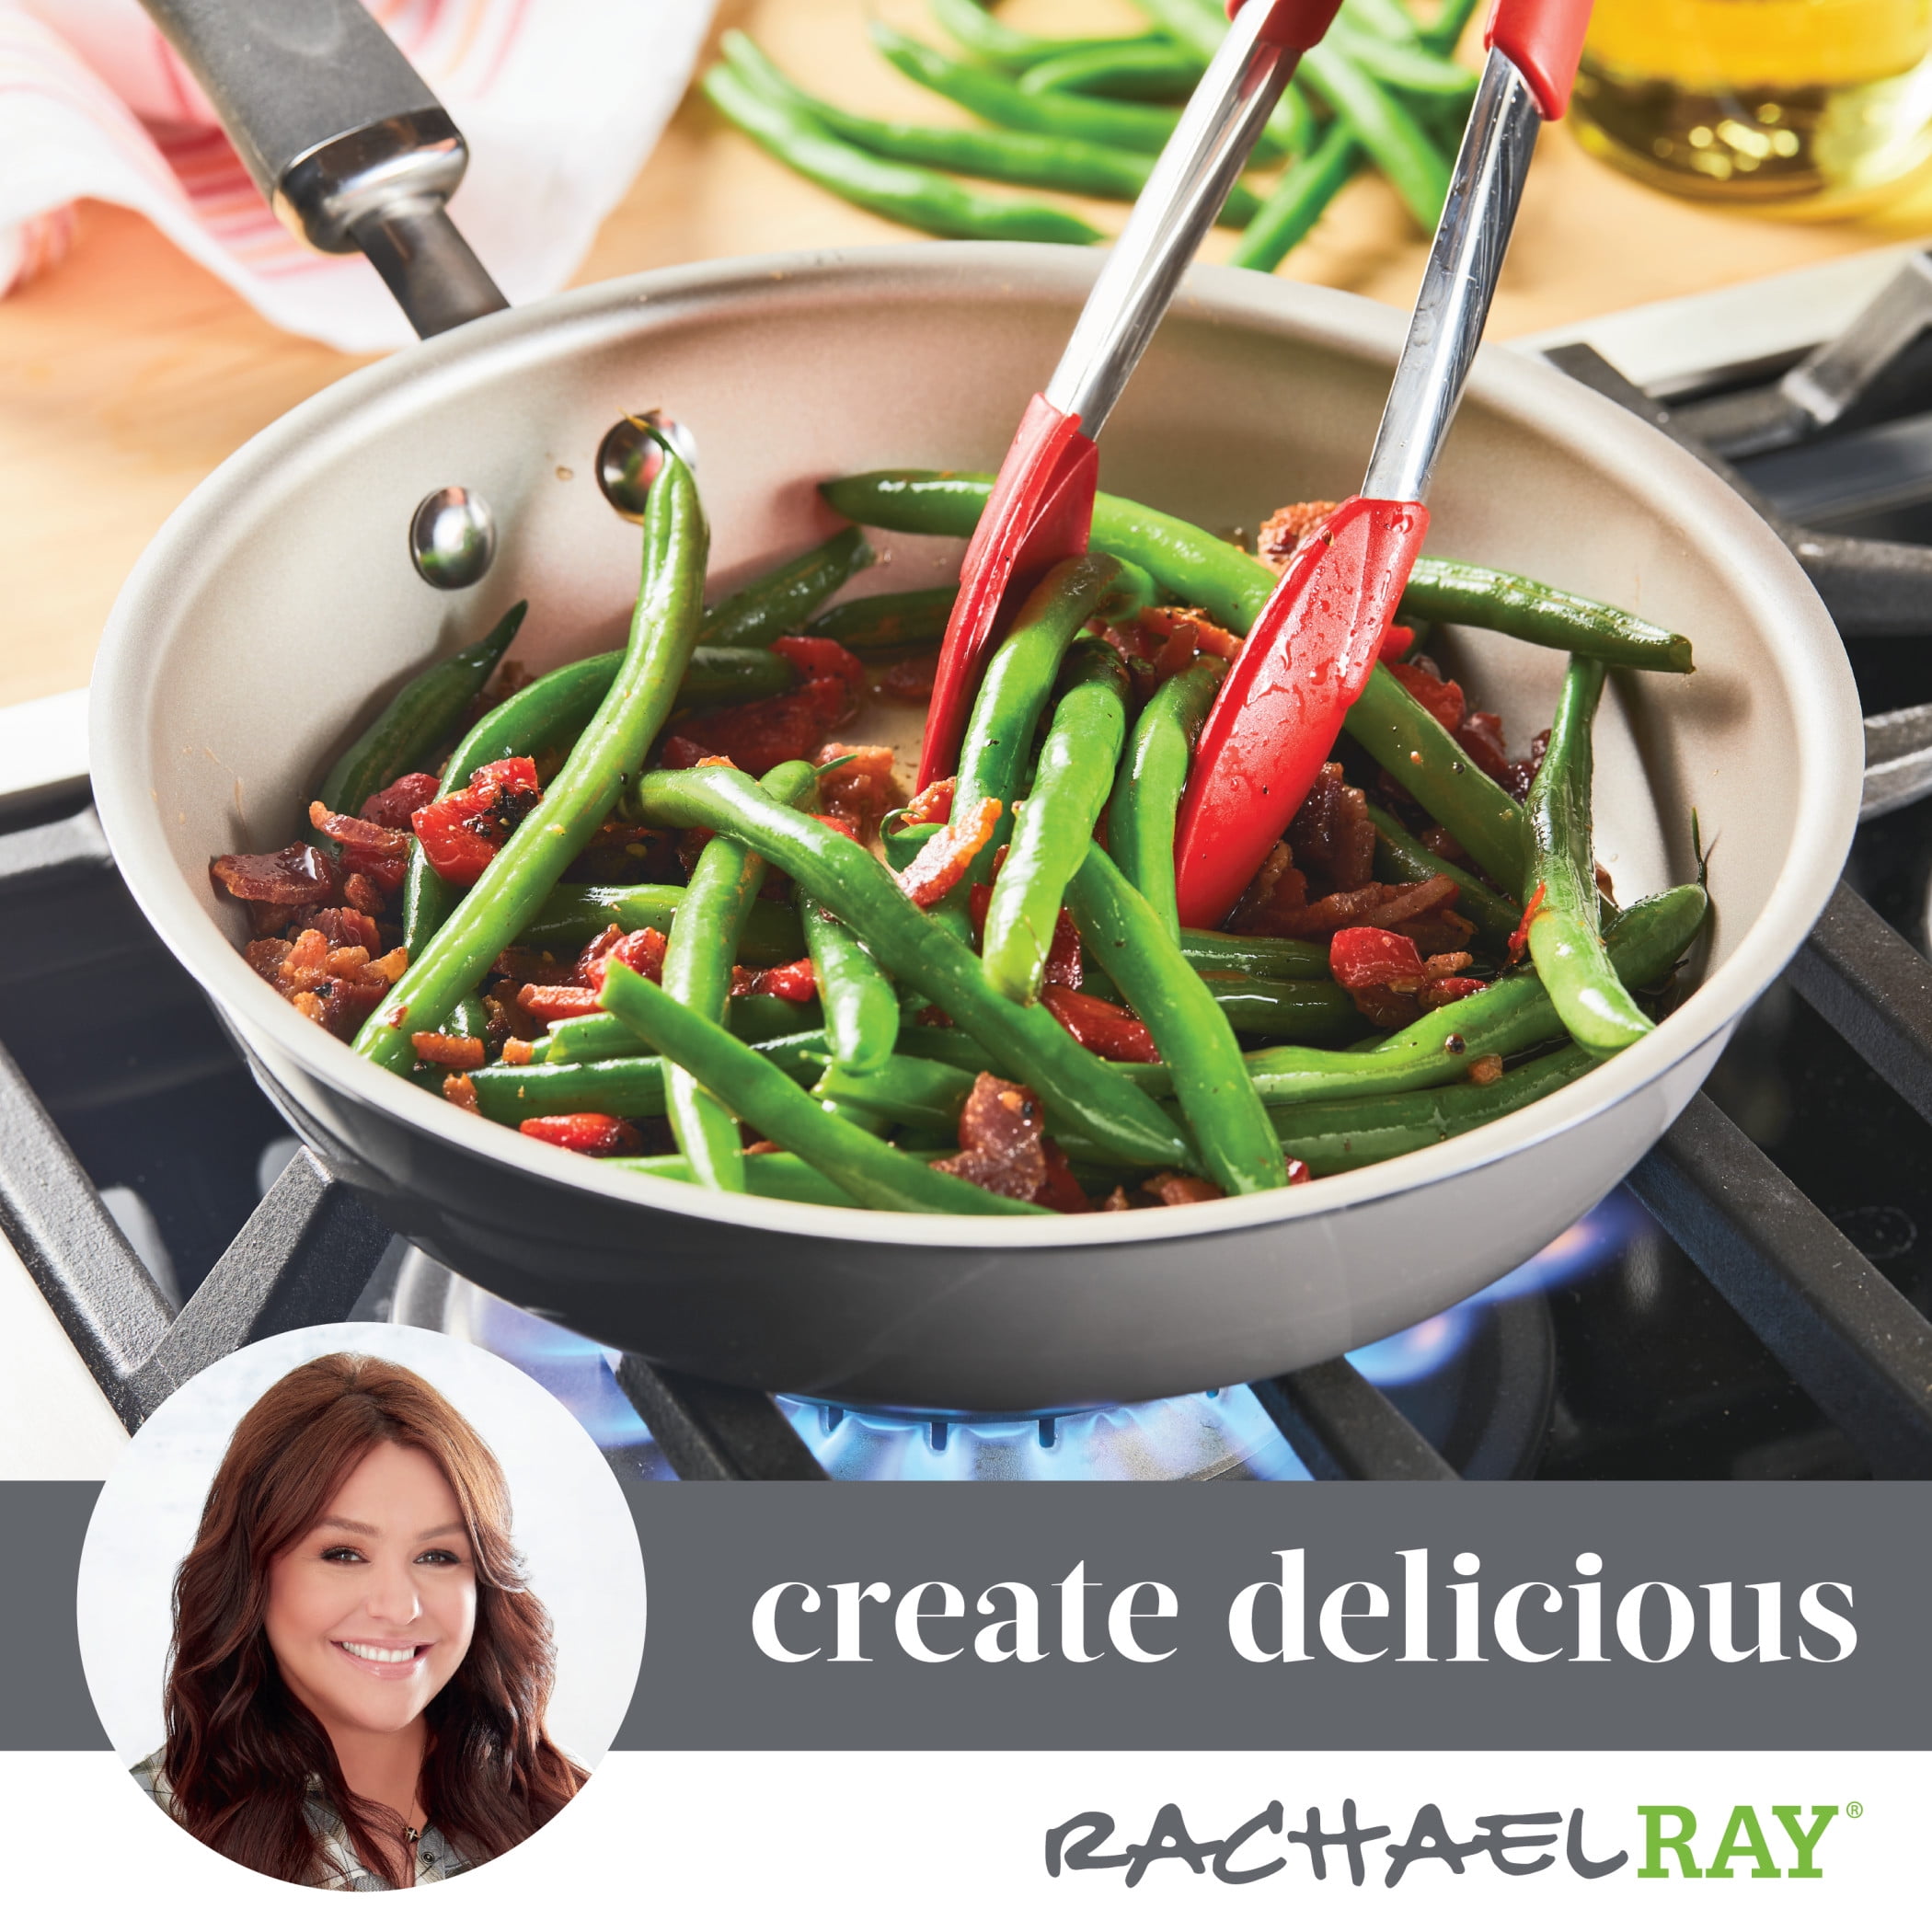 Hard Anodized Nonstick Cookware Sets – Rachael Ray